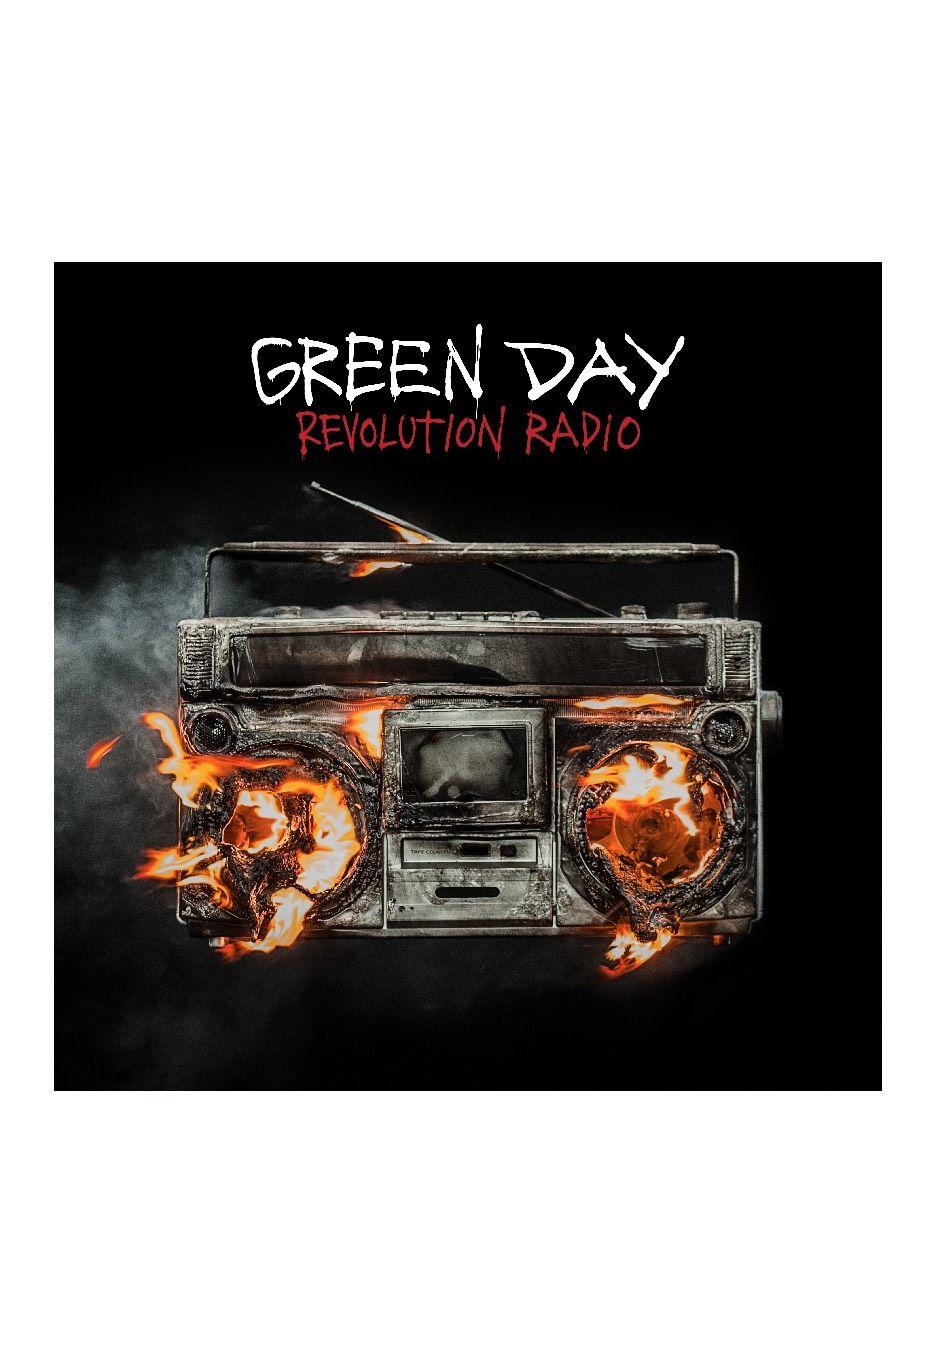 Green Day Revolution Radio Logo - Green Day Radio, Vinyl and DVDs of your